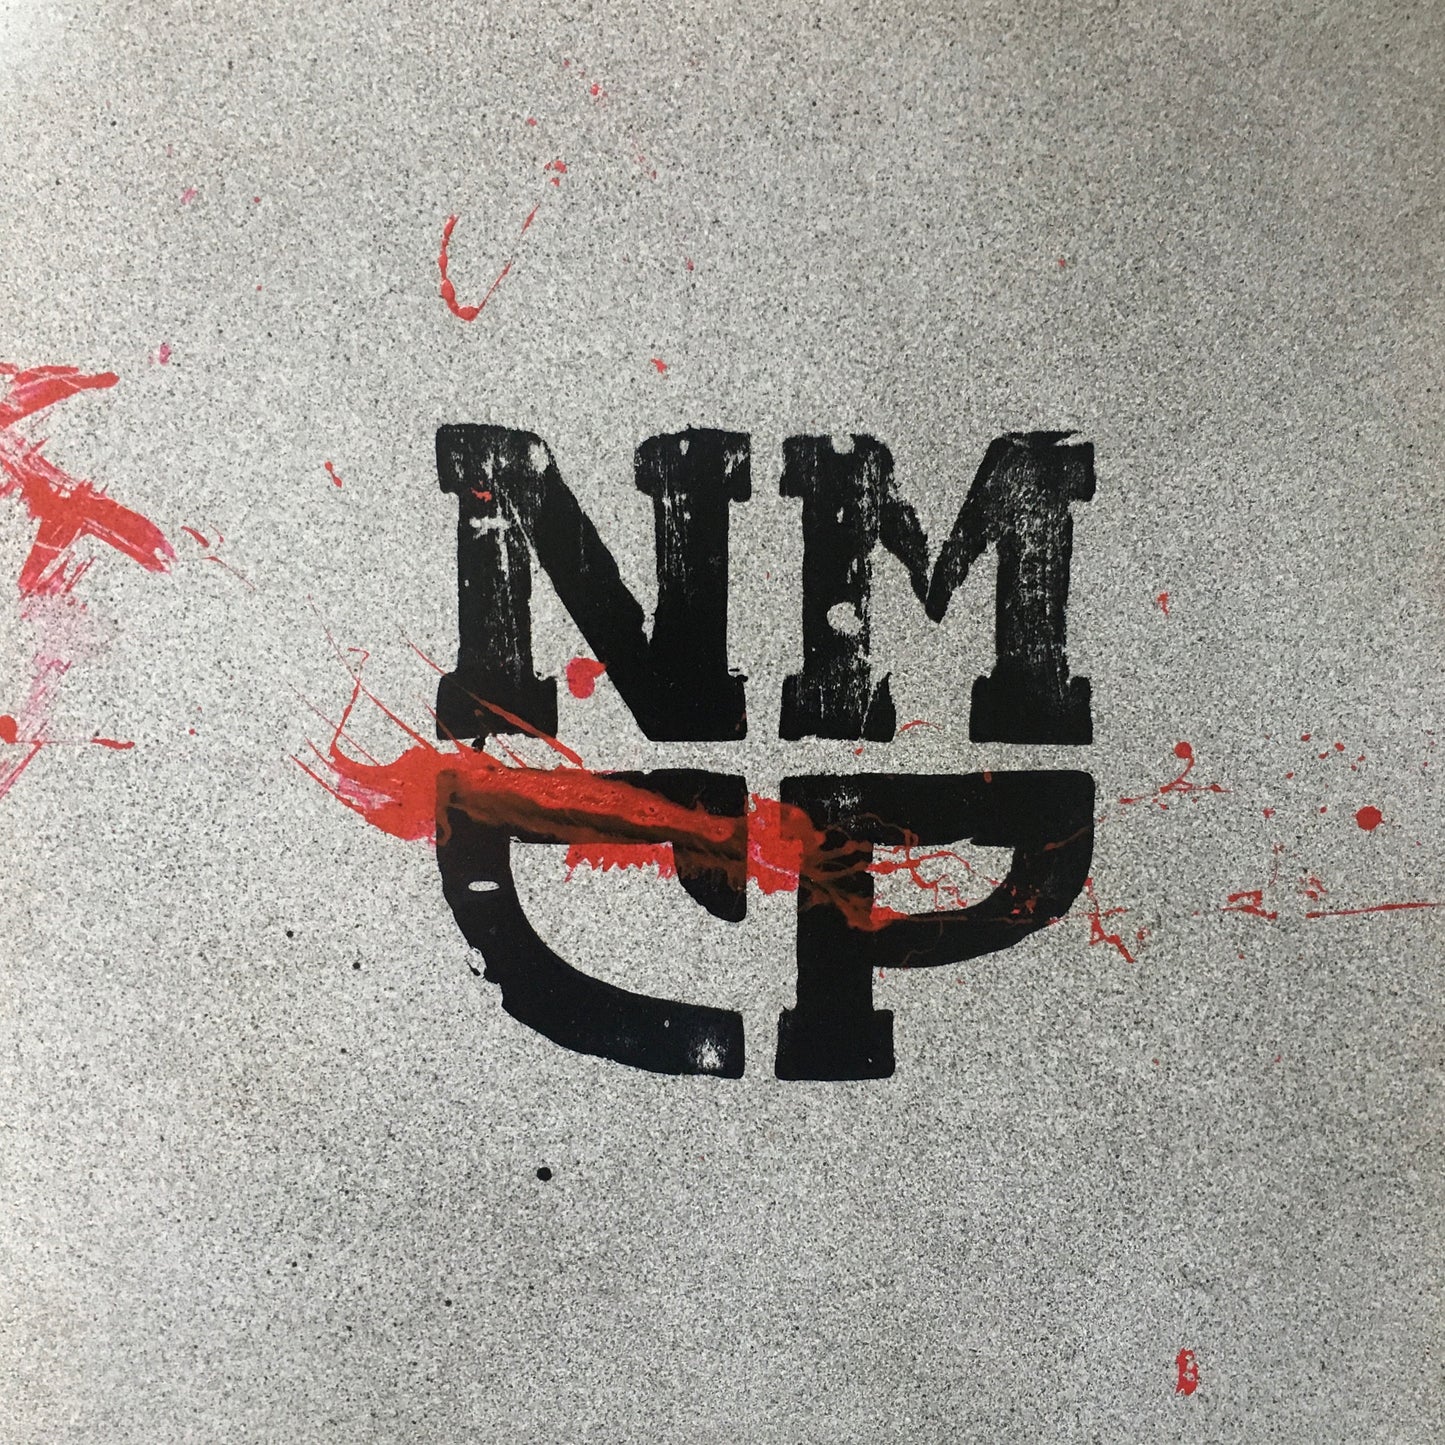 NMCP Studio - Blast Of The Iron Palm - Limited Edition Picture Disc